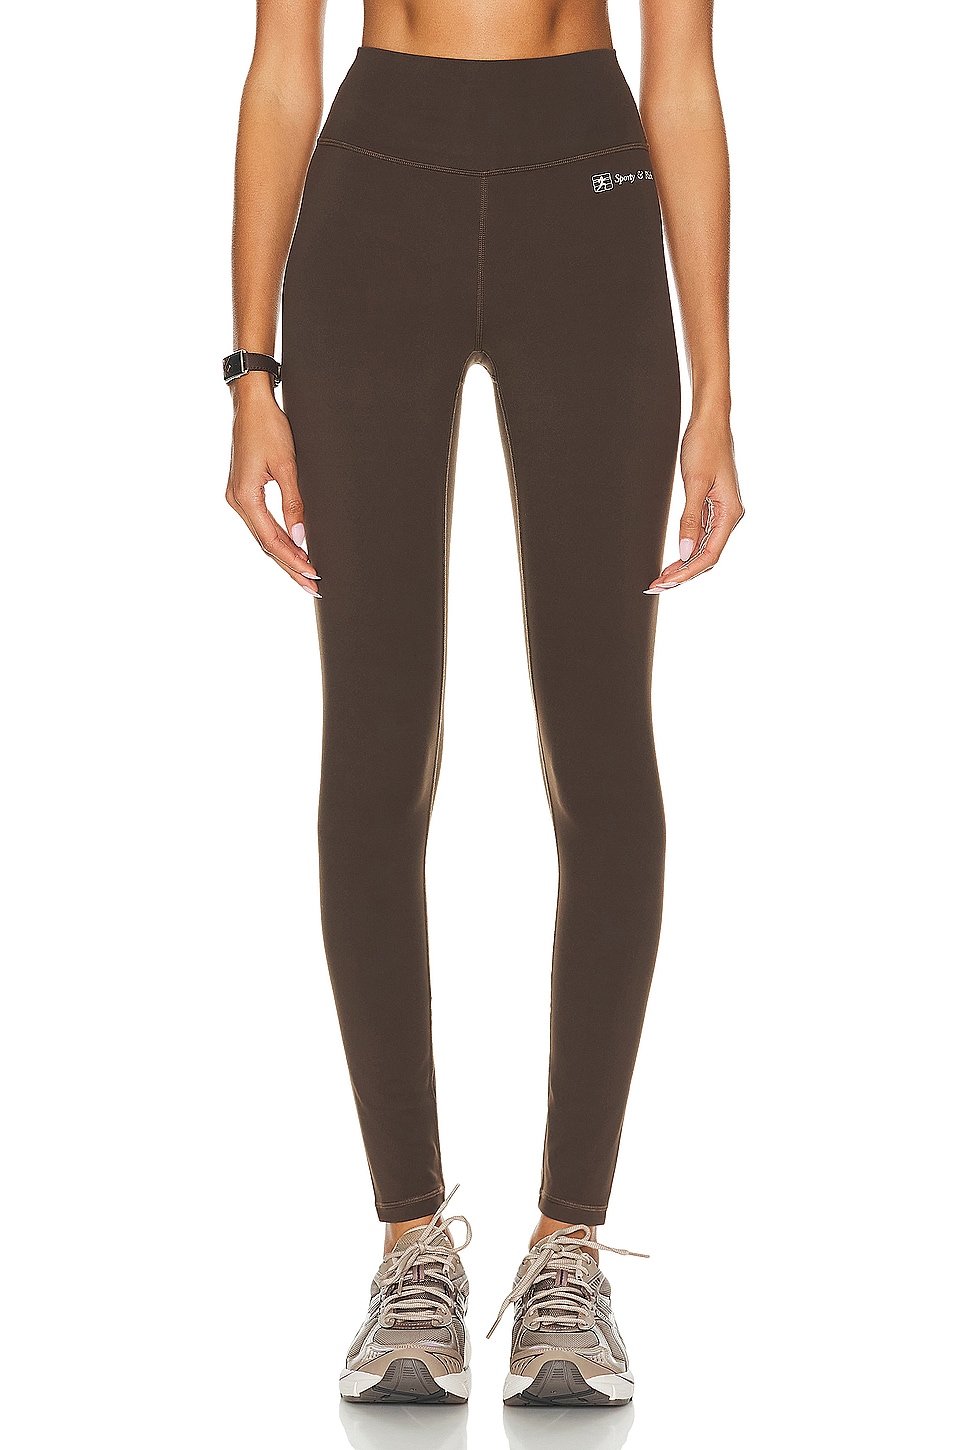 Image 1 of Sporty & Rich Runner Script High Waisted Legging in Chocolate